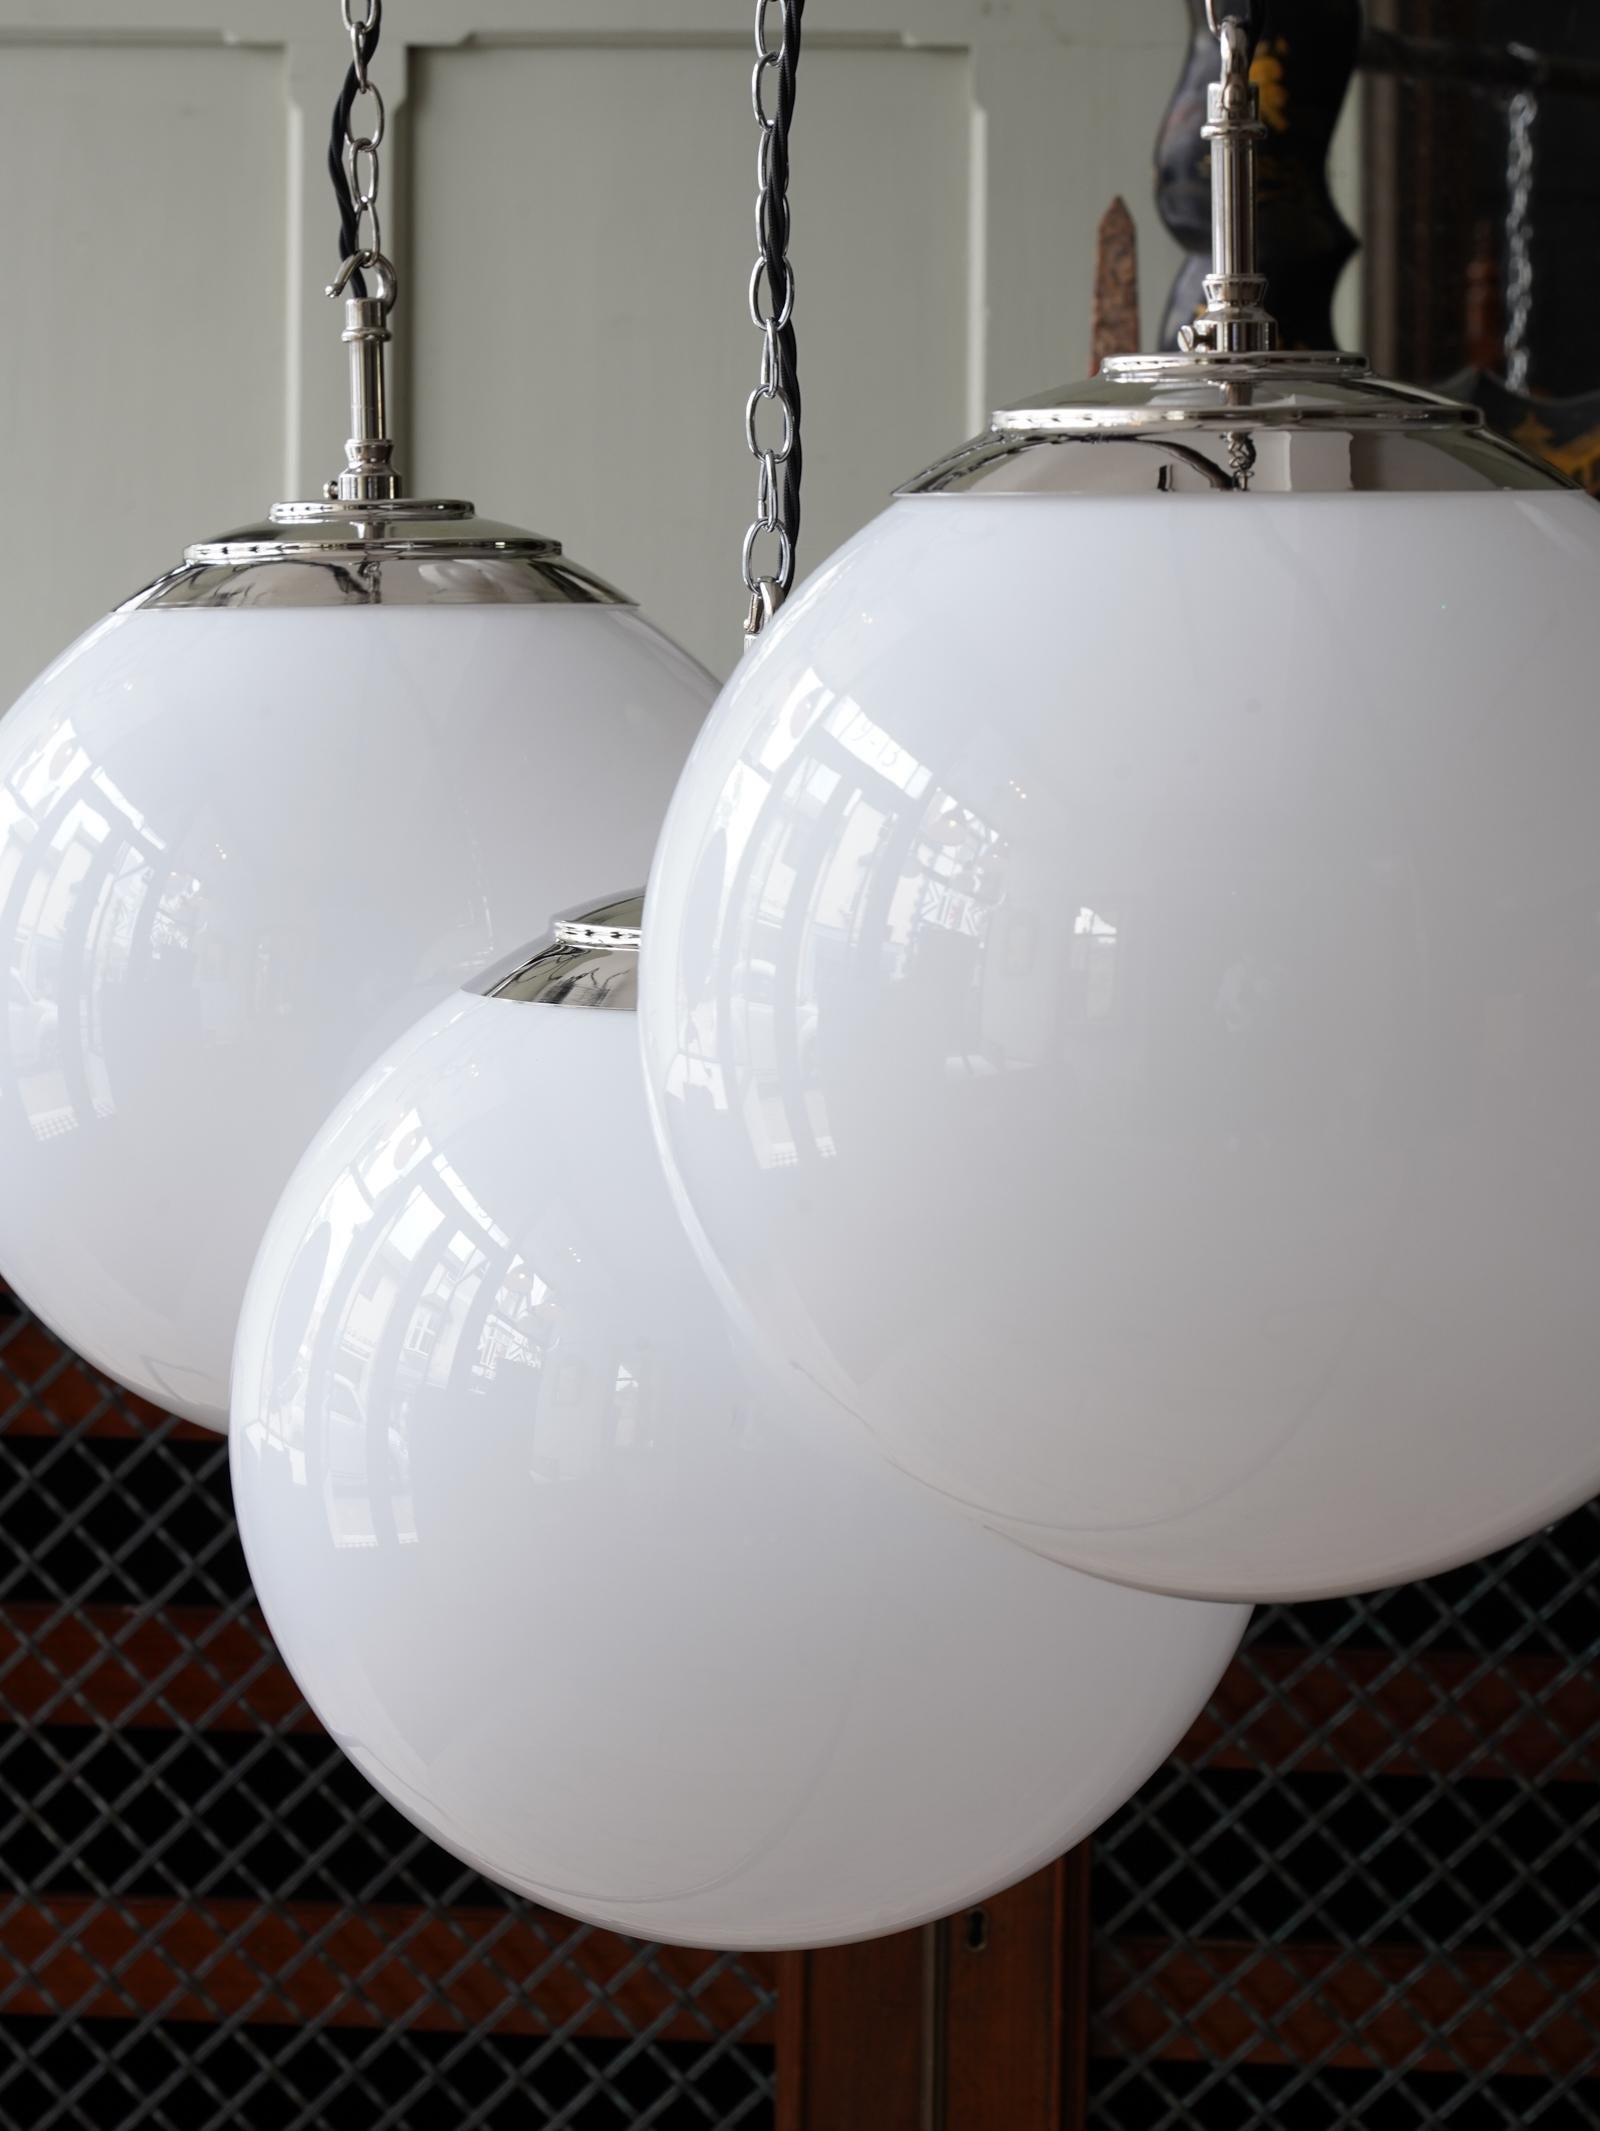 Introducing The Tomkin opaline glass pendant light, one of a new lighting range we will be releasing throughout the year and sold exclusively through our website.

The entire range has been designed with Drew's knowledge, experience and desire for